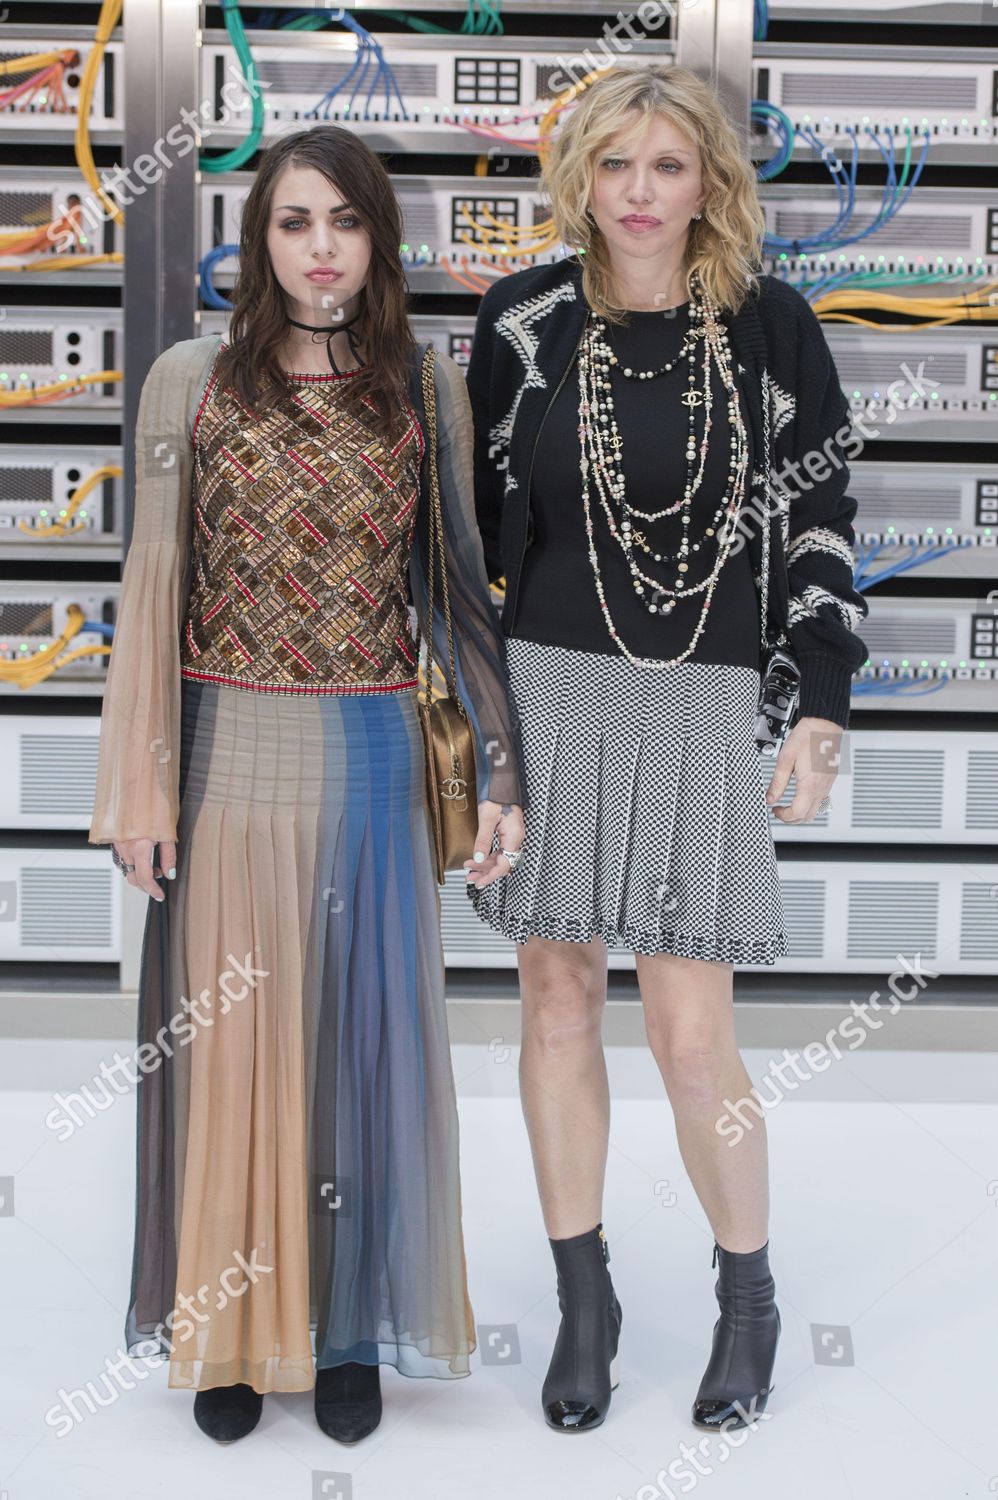 Courtney Love, Lily-Rose Depp and Carla Bruni lead the fash pack at Inside  Chanel event during Paris Fashion Week